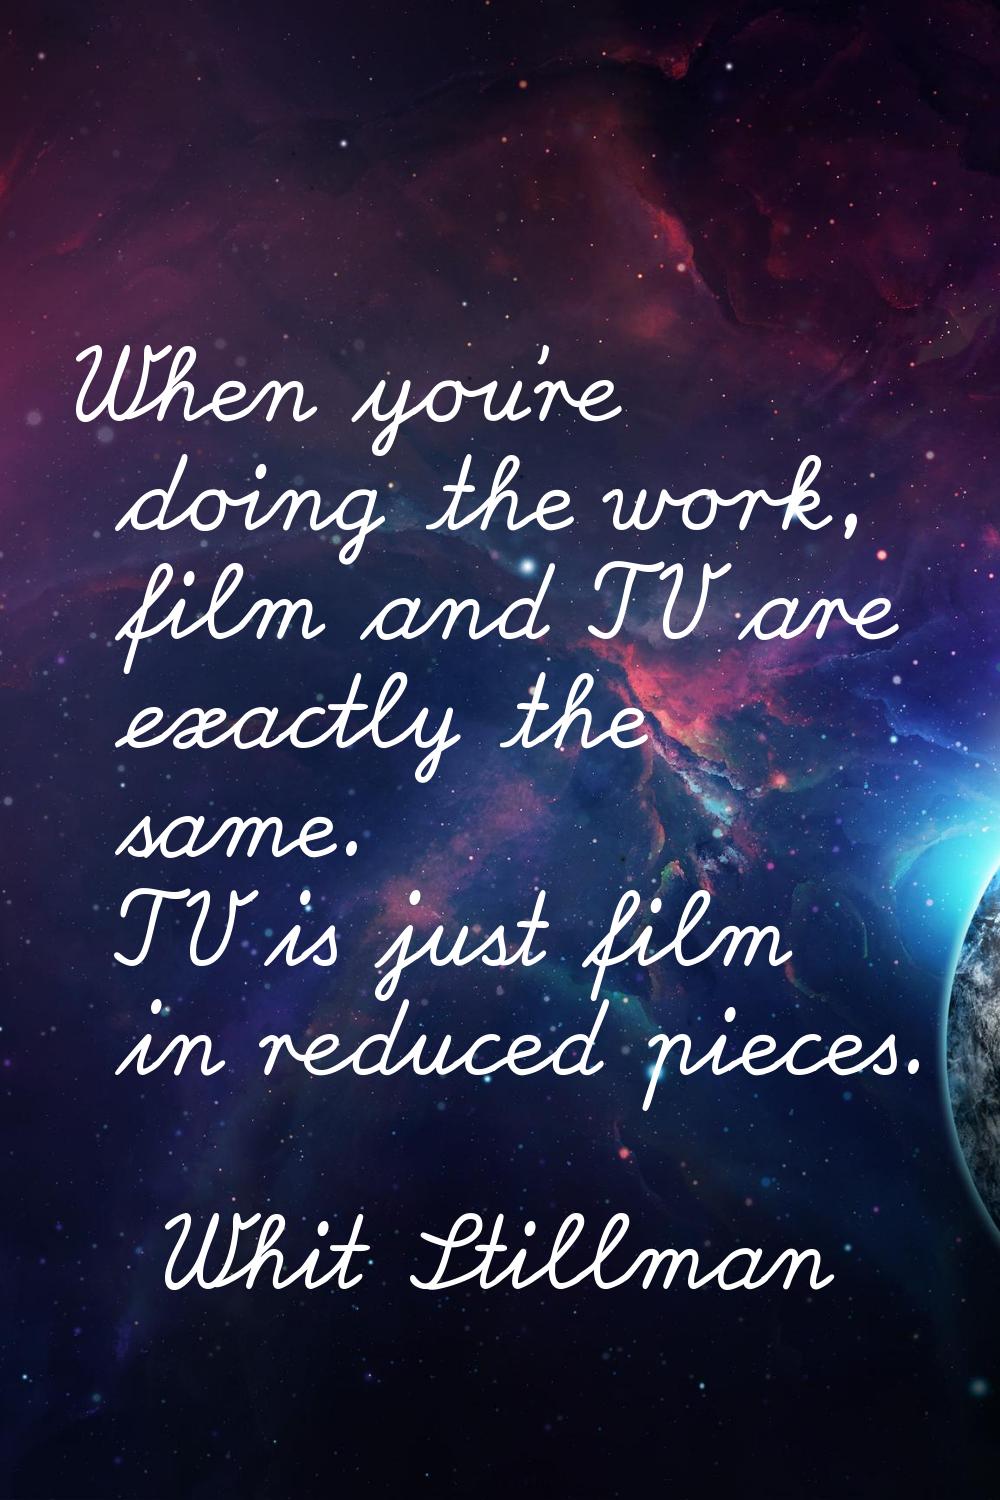 When you're doing the work, film and TV are exactly the same. TV is just film in reduced pieces.